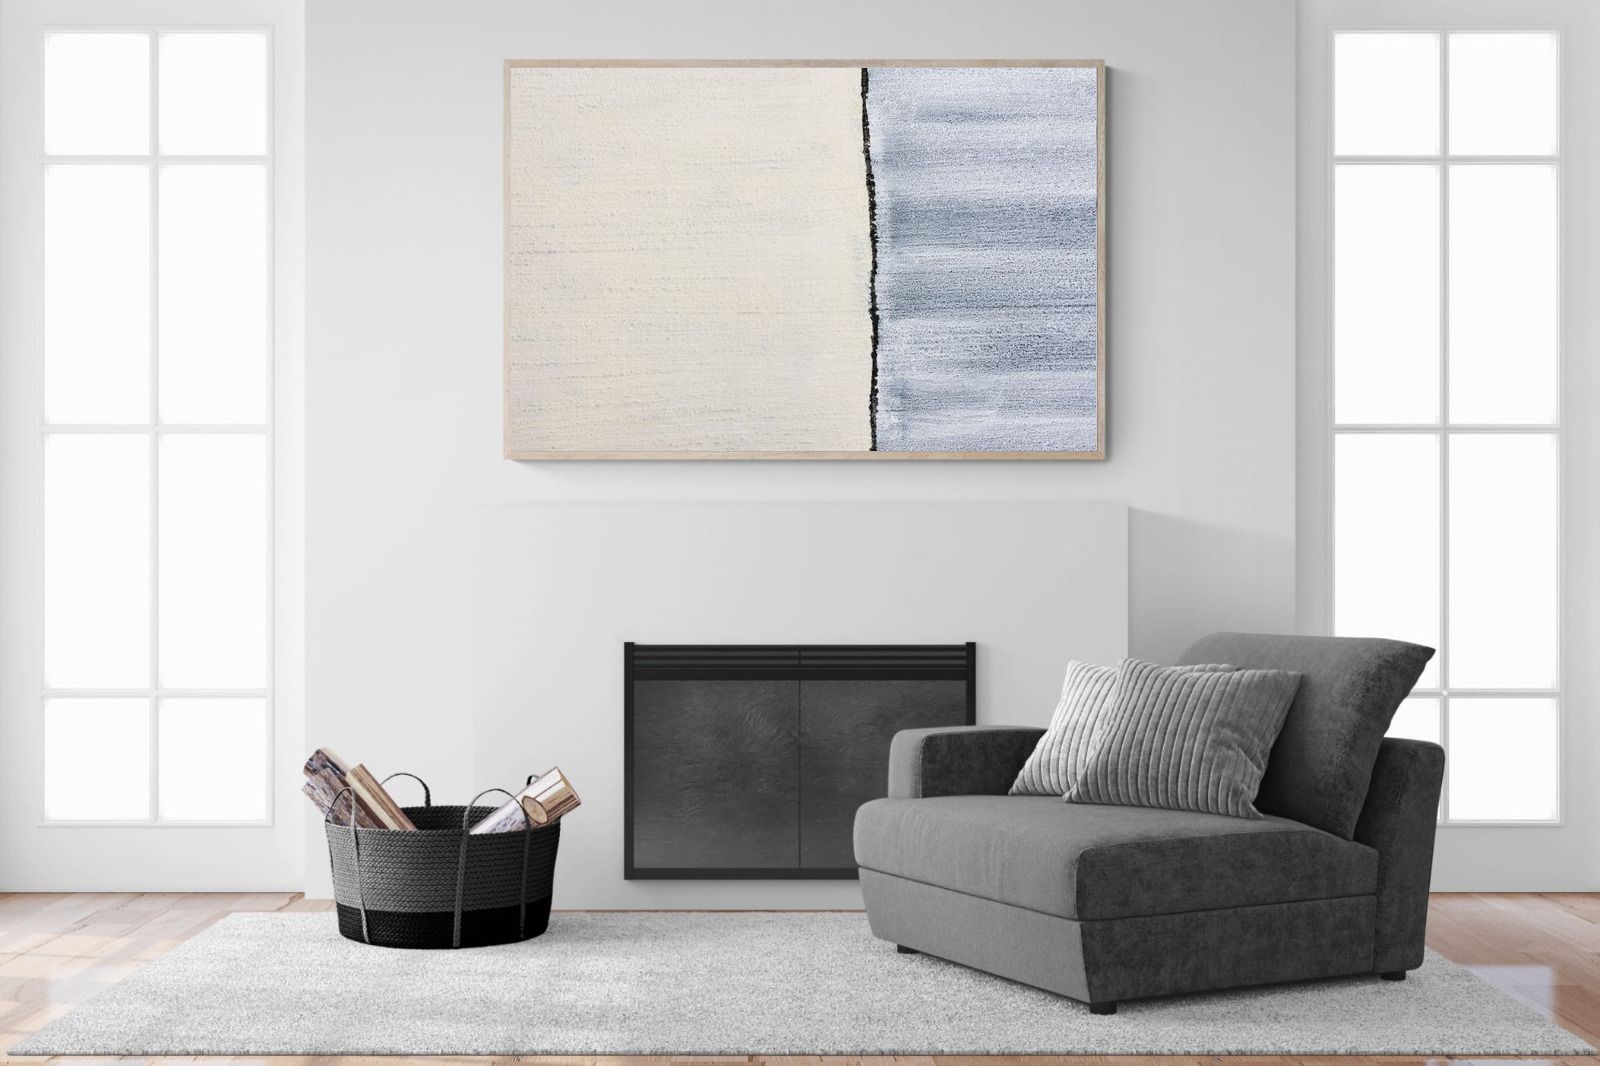 Two Thirds-Wall_Art-150 x 100cm-Mounted Canvas-Wood-Pixalot